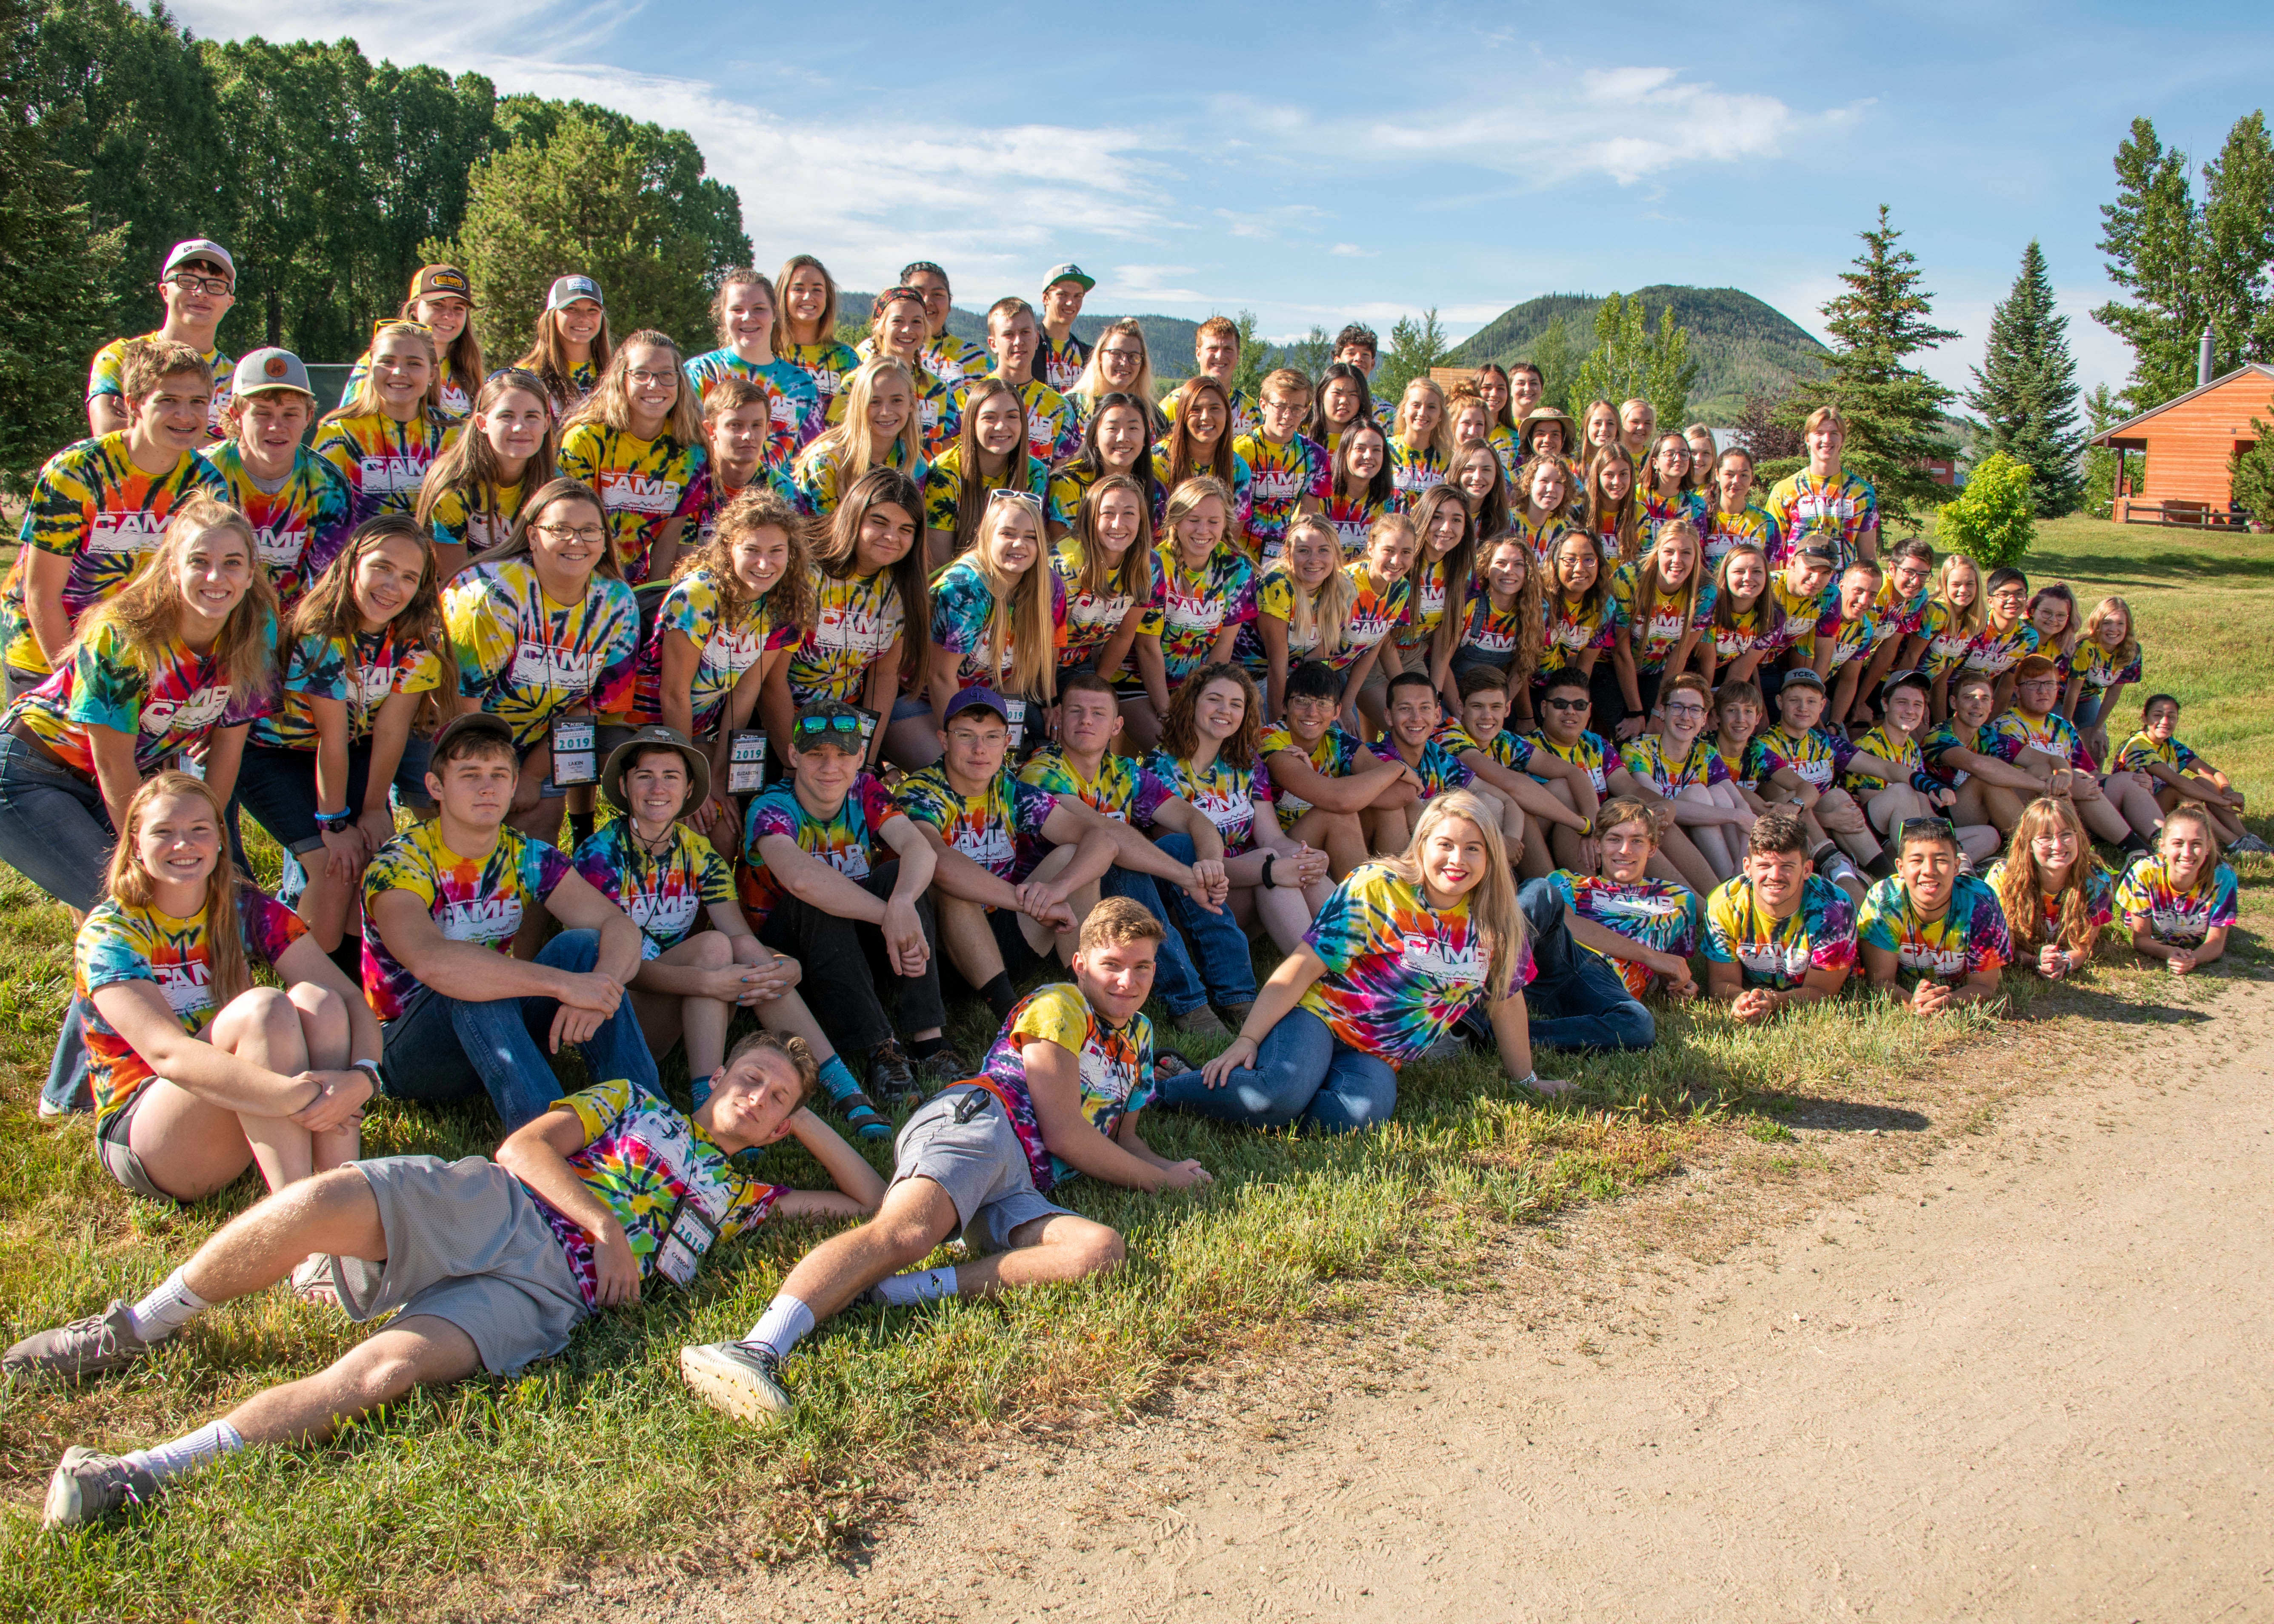 2019 CYLC Group Photo in tie dye shirts